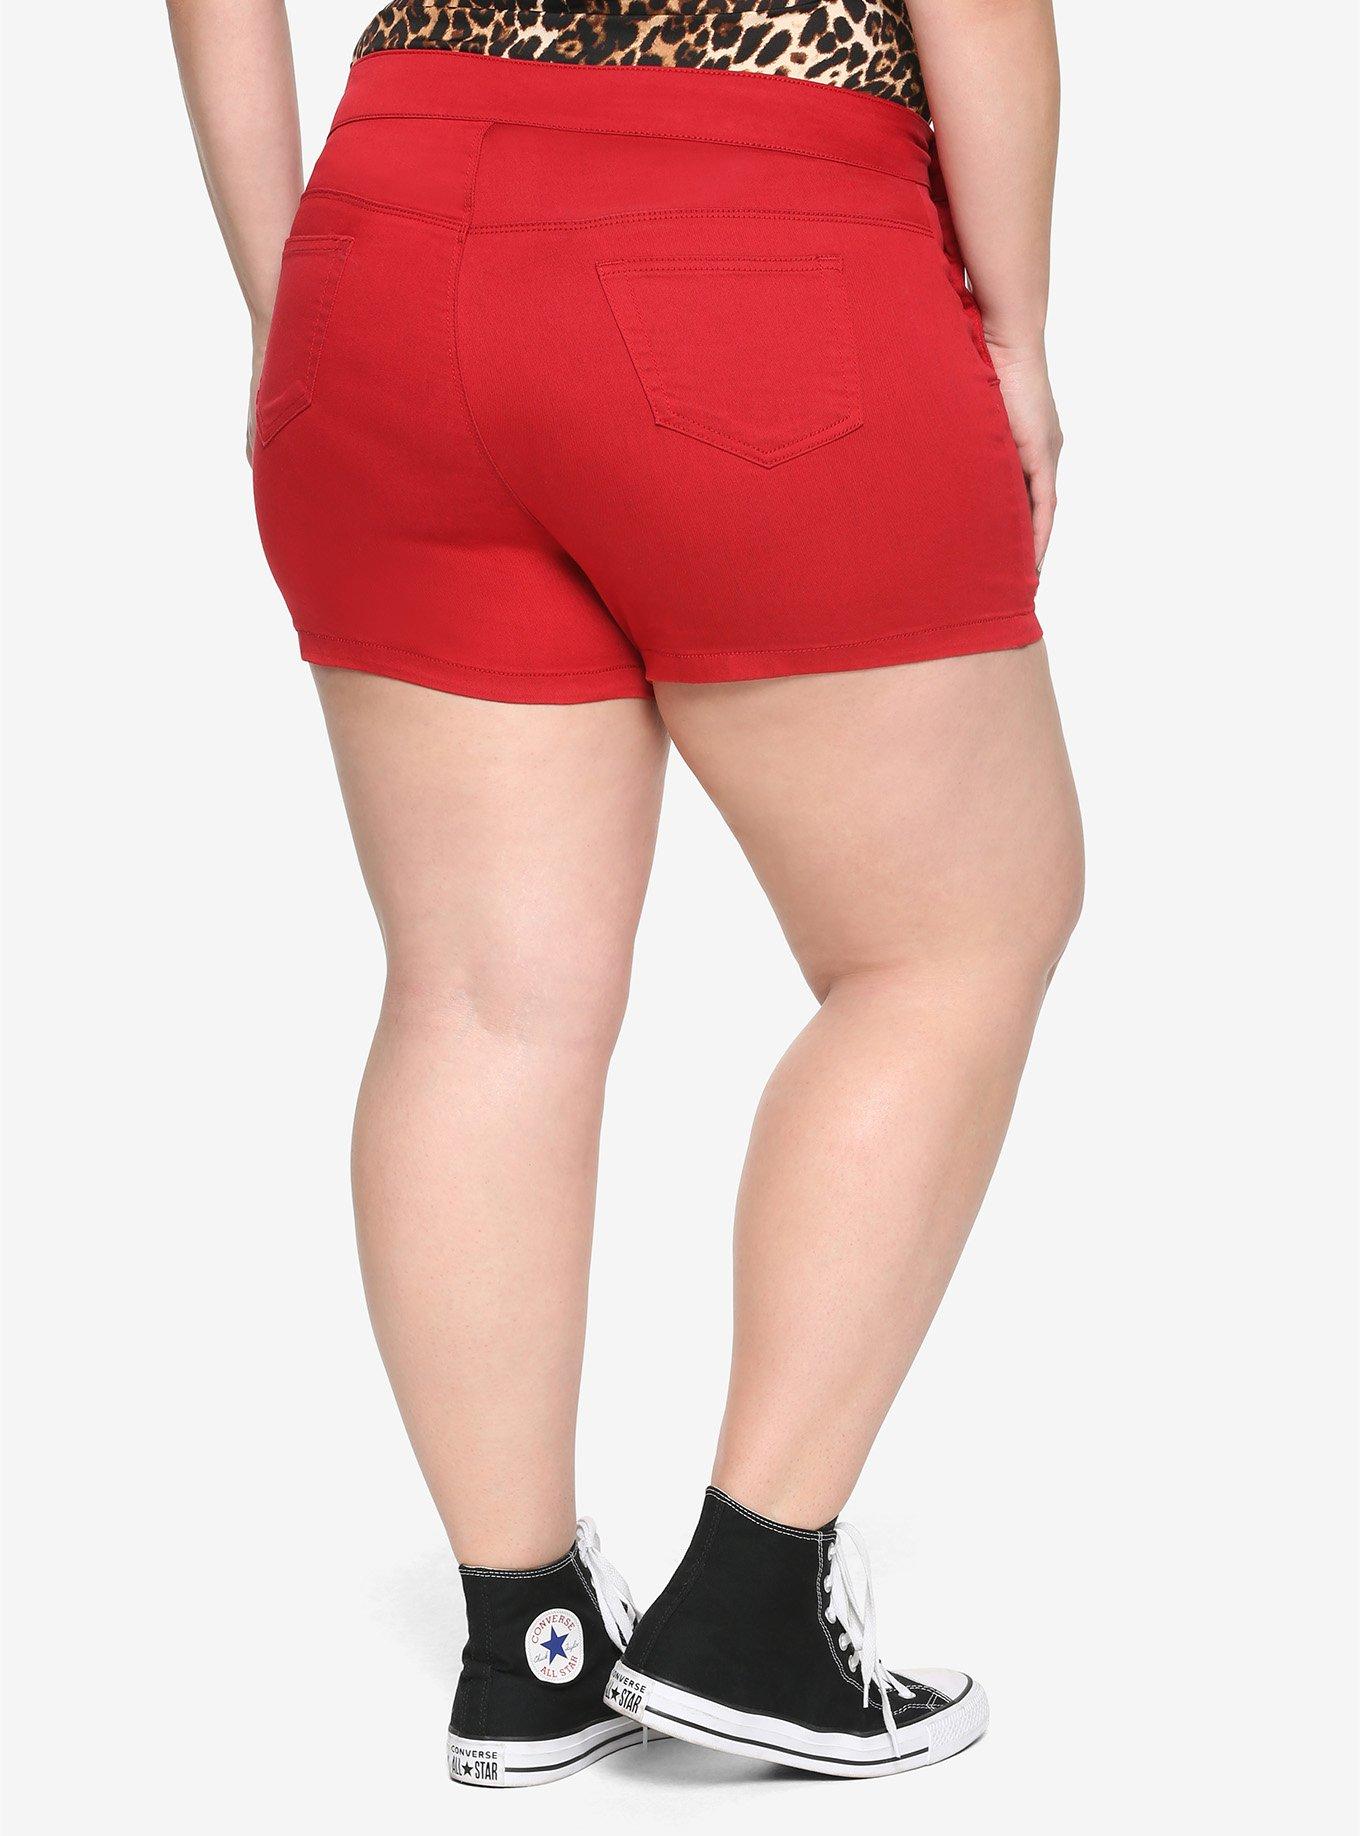 Red High-Waisted Sailor Shorts Plus Size, , alternate